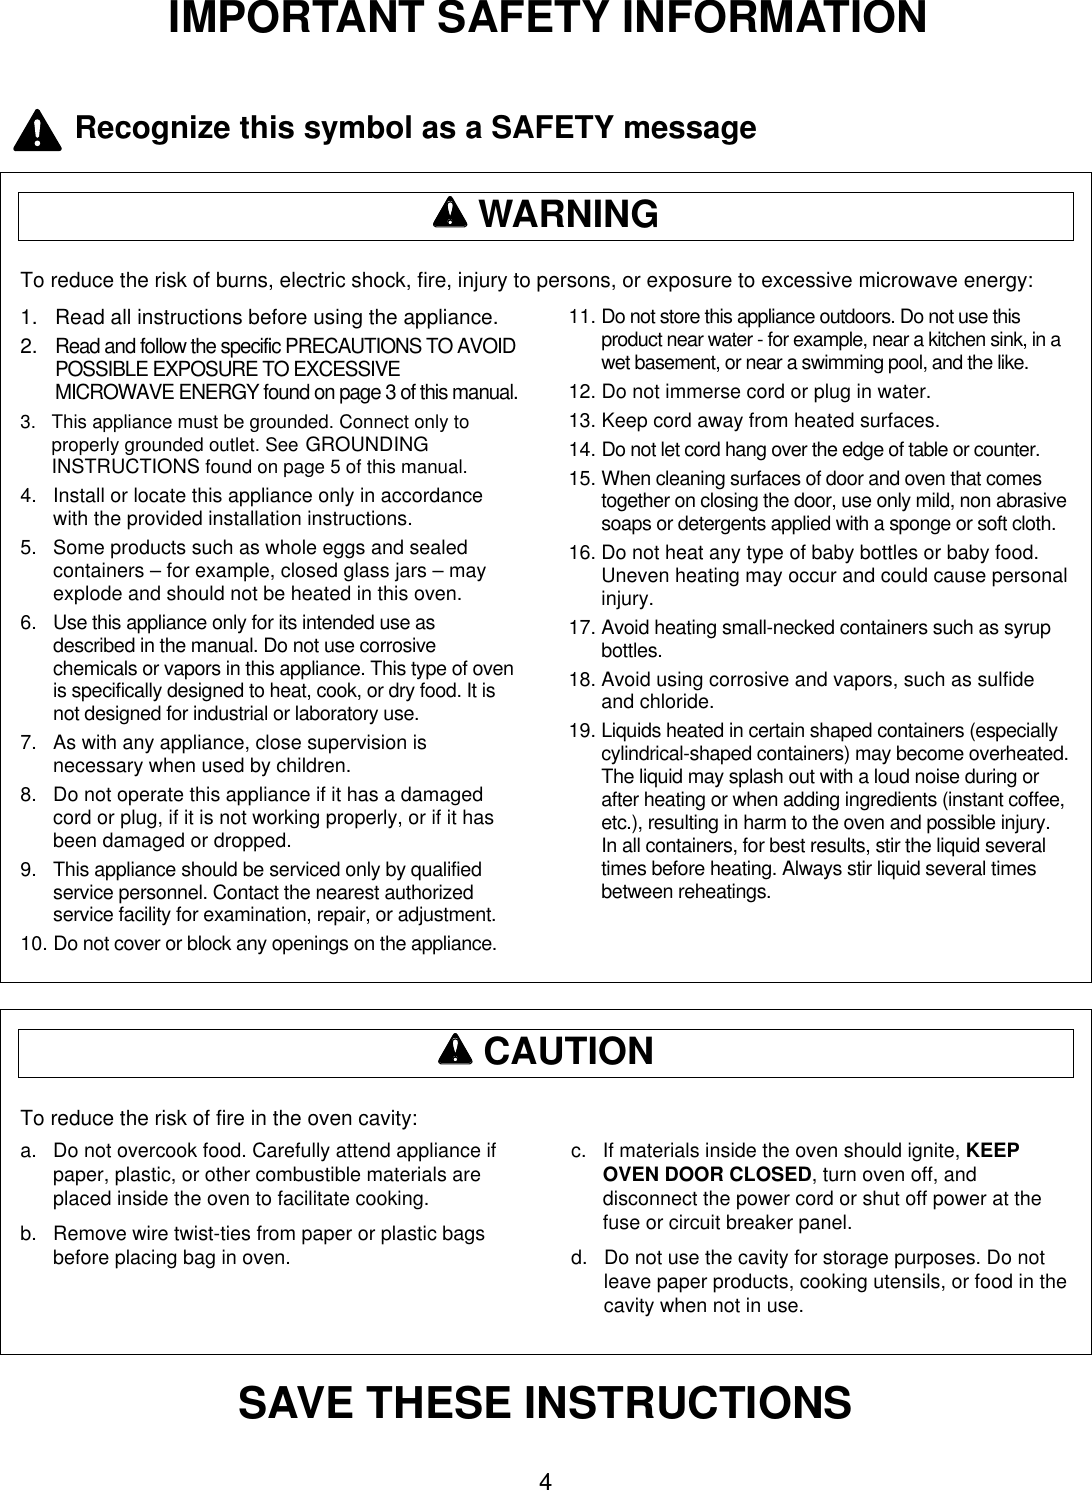 4IMPORTANT SAFETY INFORMATIONTo reduce the risk of burns, electric shock, fire, injury to persons, or exposure to excessive microwave energy:ww  WARNING1.   Read all instructions before using the appliance.2.   Read and follow the specific PRECAUTIONS TO AVOIDPOSSIBLE EXPOSURE TO EXCESSIVEMICROWAVE ENERGY found on page 3 of this manual.3.   This appliance must be grounded. Connect only toproperly grounded outlet. See GROUNDINGINSTRUCTIONS found on page 5 of this manual.4.   Install or locate this appliance only in accordancewith the provided installation instructions.5.   Some products such as whole eggs and sealedcontainers – for example, closed glass jars – mayexplode and should not be heated in this oven.6.   Use this appliance only for its intended use asdescribed in the manual. Do not use corrosivechemicals or vapors in this appliance. This type of ovenis specifically designed to heat, cook, or dry food. It isnot designed for industrial or laboratory use.7.   As with any appliance, close supervision isnecessary when used by children.8.   Do not operate this appliance if it has a damagedcord or plug, if it is not working properly, or if it hasbeen damaged or dropped.9.   This appliance should be serviced only by qualifiedservice personnel. Contact the nearest authorizedservice facility for examination, repair, or adjustment.10. Do not cover or block any openings on the appliance.11. Do not store this appliance outdoors. Do not use thisproduct near water - for example, near a kitchen sink, in awet basement, or near a swimming pool, and the like.12. Do not immerse cord or plug in water.13. Keep cord away from heated surfaces.14. Do not let cord hang over the edge of table or counter.15. When cleaning surfaces of door and oven that comestogether on closing the door, use only mild, non abrasivesoaps or detergents applied with a sponge or soft cloth.16. Do not heat any type of baby bottles or baby food.Uneven heating may occur and could cause personalinjury.17. Avoid heating small-necked containers such as syrupbottles.18. Avoid using corrosive and vapors, such as sulfideand chloride.19. Liquids heated in certain shaped containers (especiallycylindrical-shaped containers) may become overheated.The liquid may splash out with a loud noise during orafter heating or when adding ingredients (instant coffee,etc.), resulting in harm to the oven and possible injury.In all containers, for best results, stir the liquid severaltimes before heating. Always stir liquid several timesbetween reheatings.To reduce the risk of fire in the oven cavity:ww  CAUTIONa.   Do not overcook food. Carefully attend appliance ifpaper, plastic, or other combustible materials areplaced inside the oven to facilitate cooking.b.   Remove wire twist-ties from paper or plastic bagsbefore placing bag in oven.c.   If materials inside the oven should ignite, KEEPOVEN DOOR CLOSED, turn oven off, anddisconnect the power cord or shut off power at thefuse or circuit breaker panel.d.   Do not use the cavity for storage purposes. Do notleave paper products, cooking utensils, or food in thecavity when not in use.SAVE THESE INSTRUCTIONSRecognize this symbol as a SAFETY message